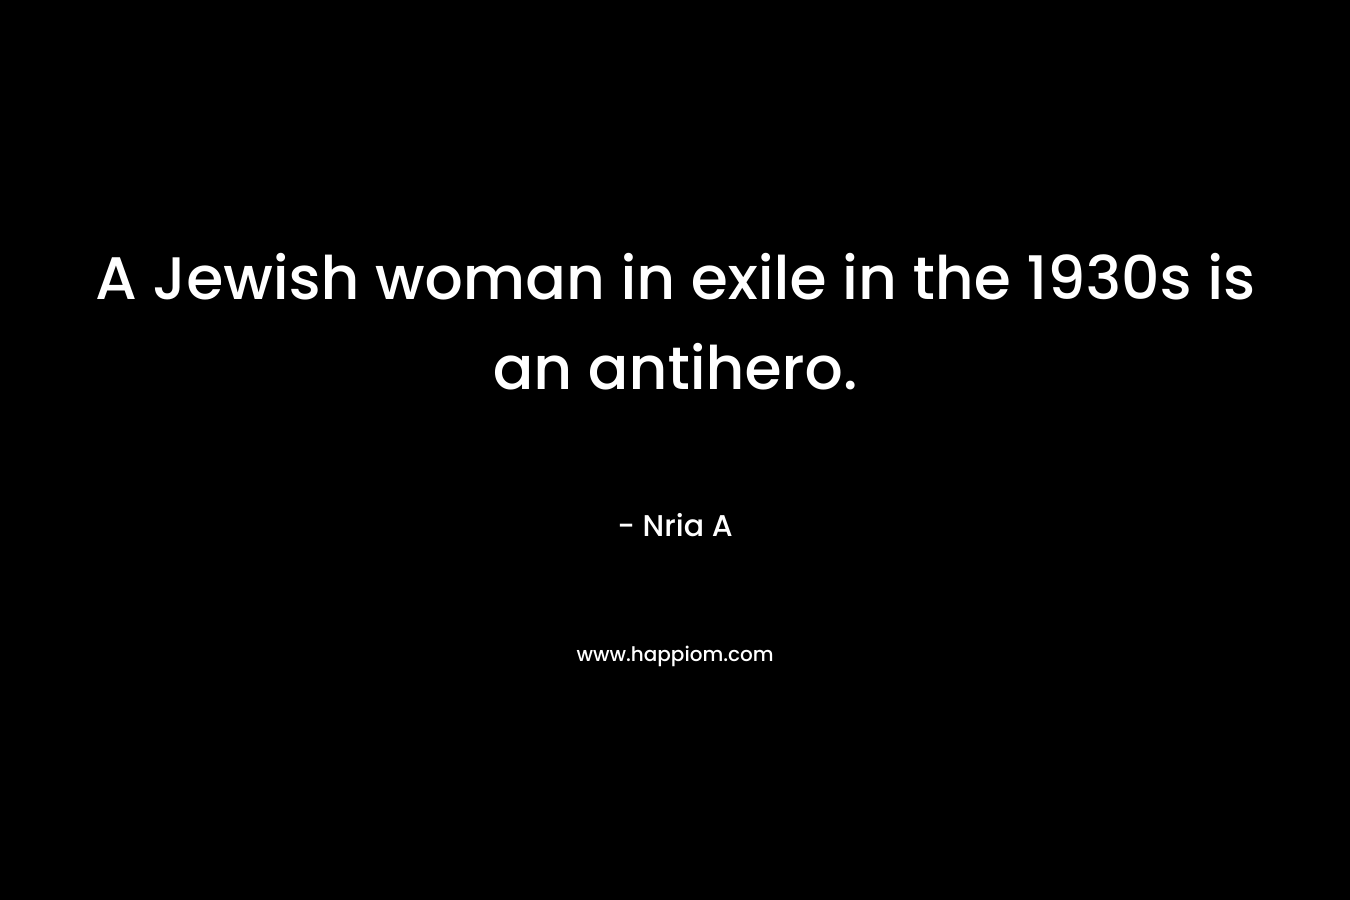 A Jewish woman in exile in the 1930s is an antihero. – Nria A